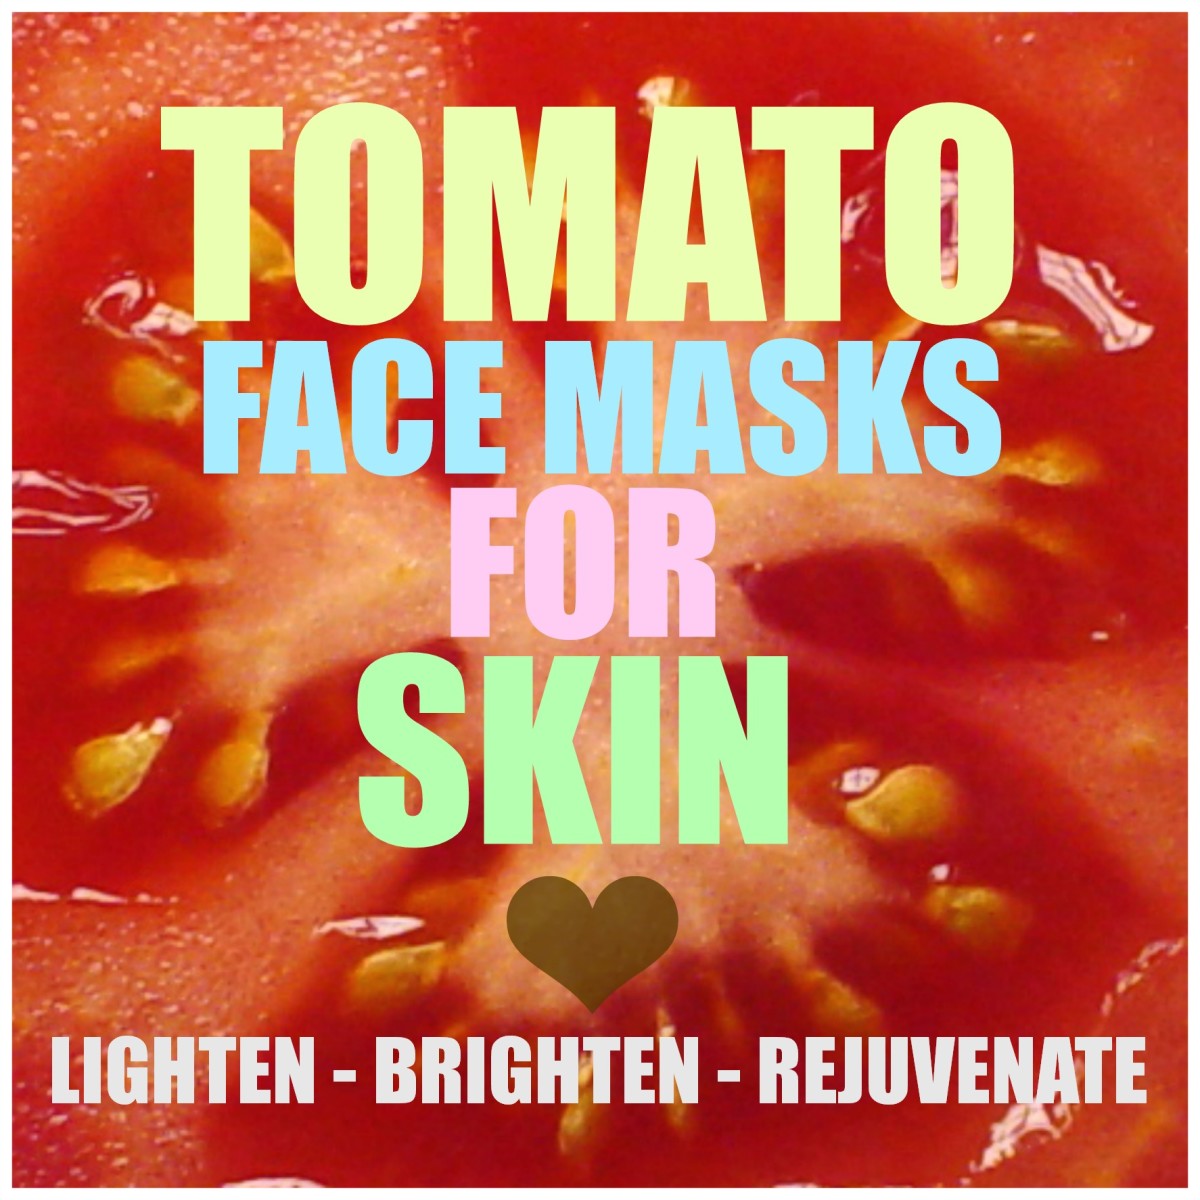 3 Homemade Tomato Face Mask Recipes for